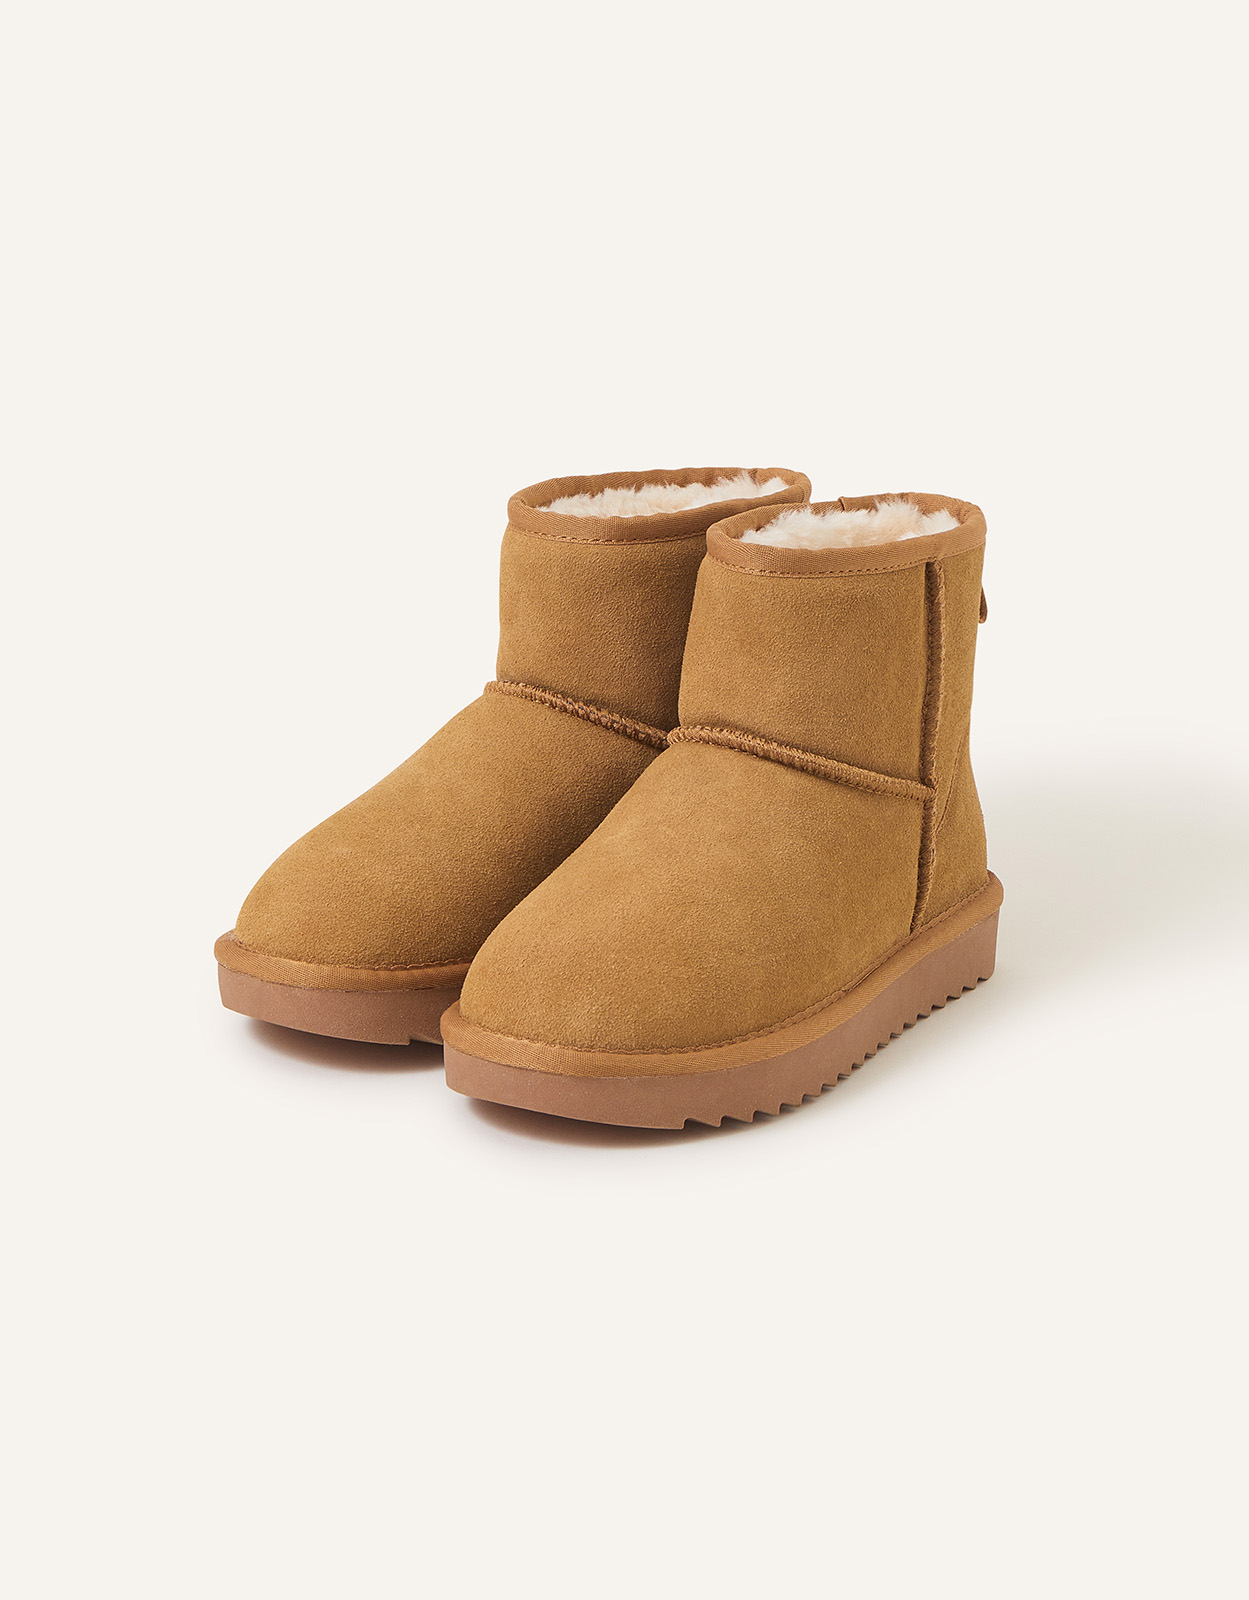 Accessorize Mid Suede Boots Tan, Size: 38